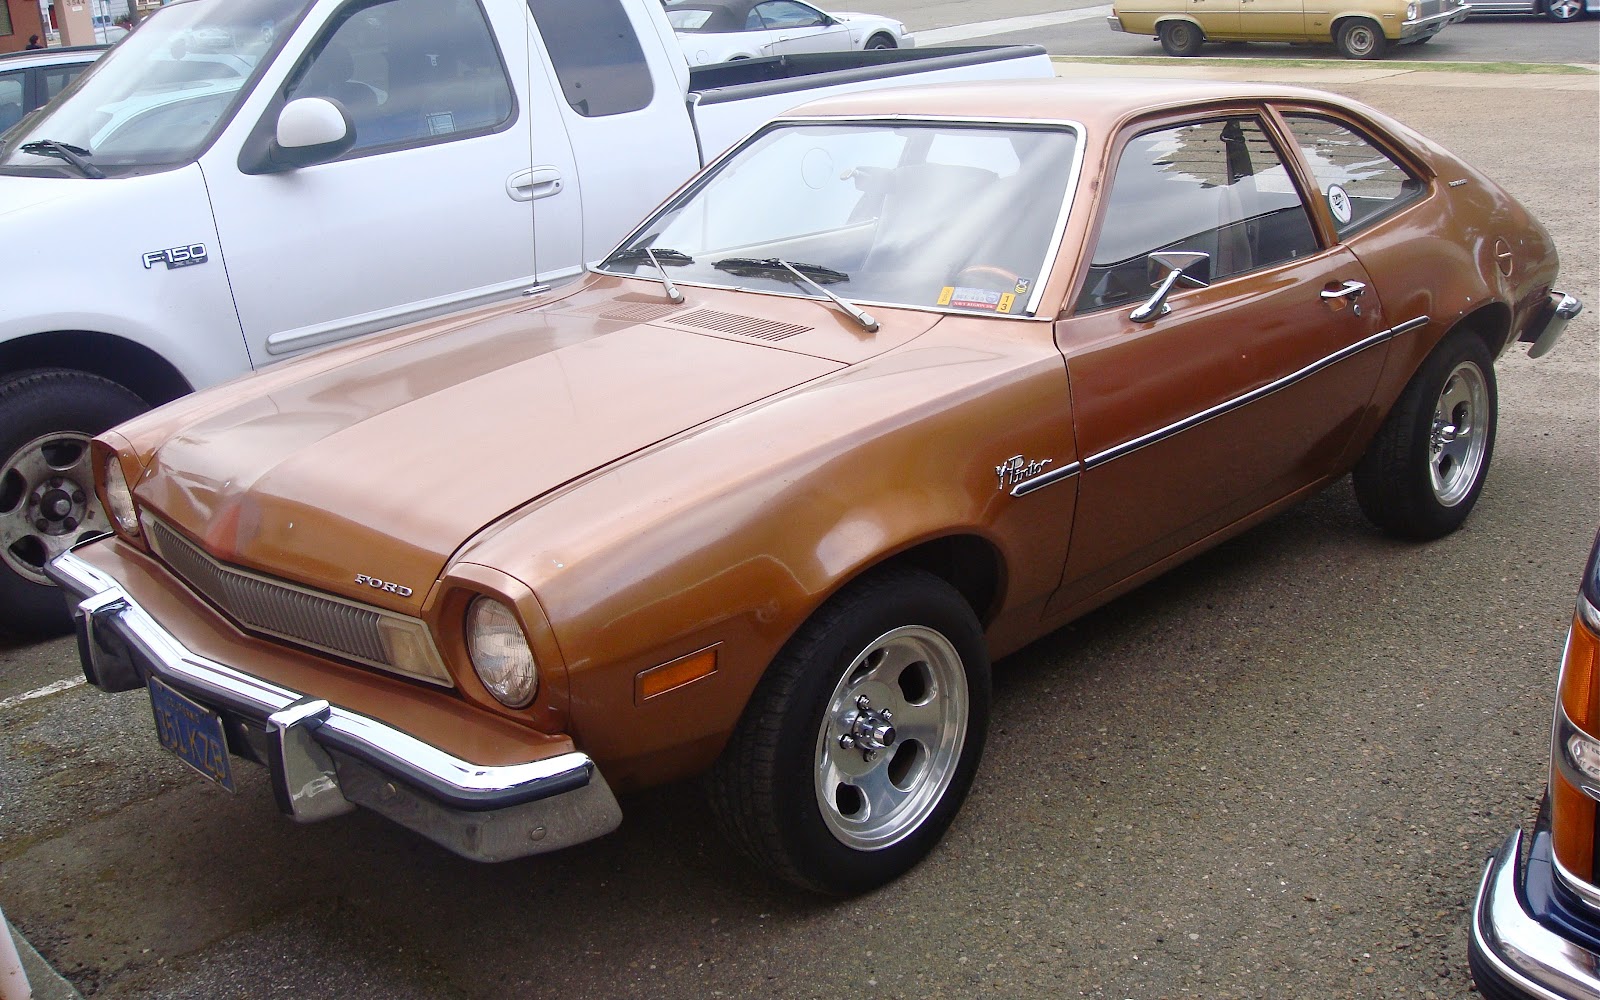 THE STREET PEEP: 1975 Ford Pinto Runabout